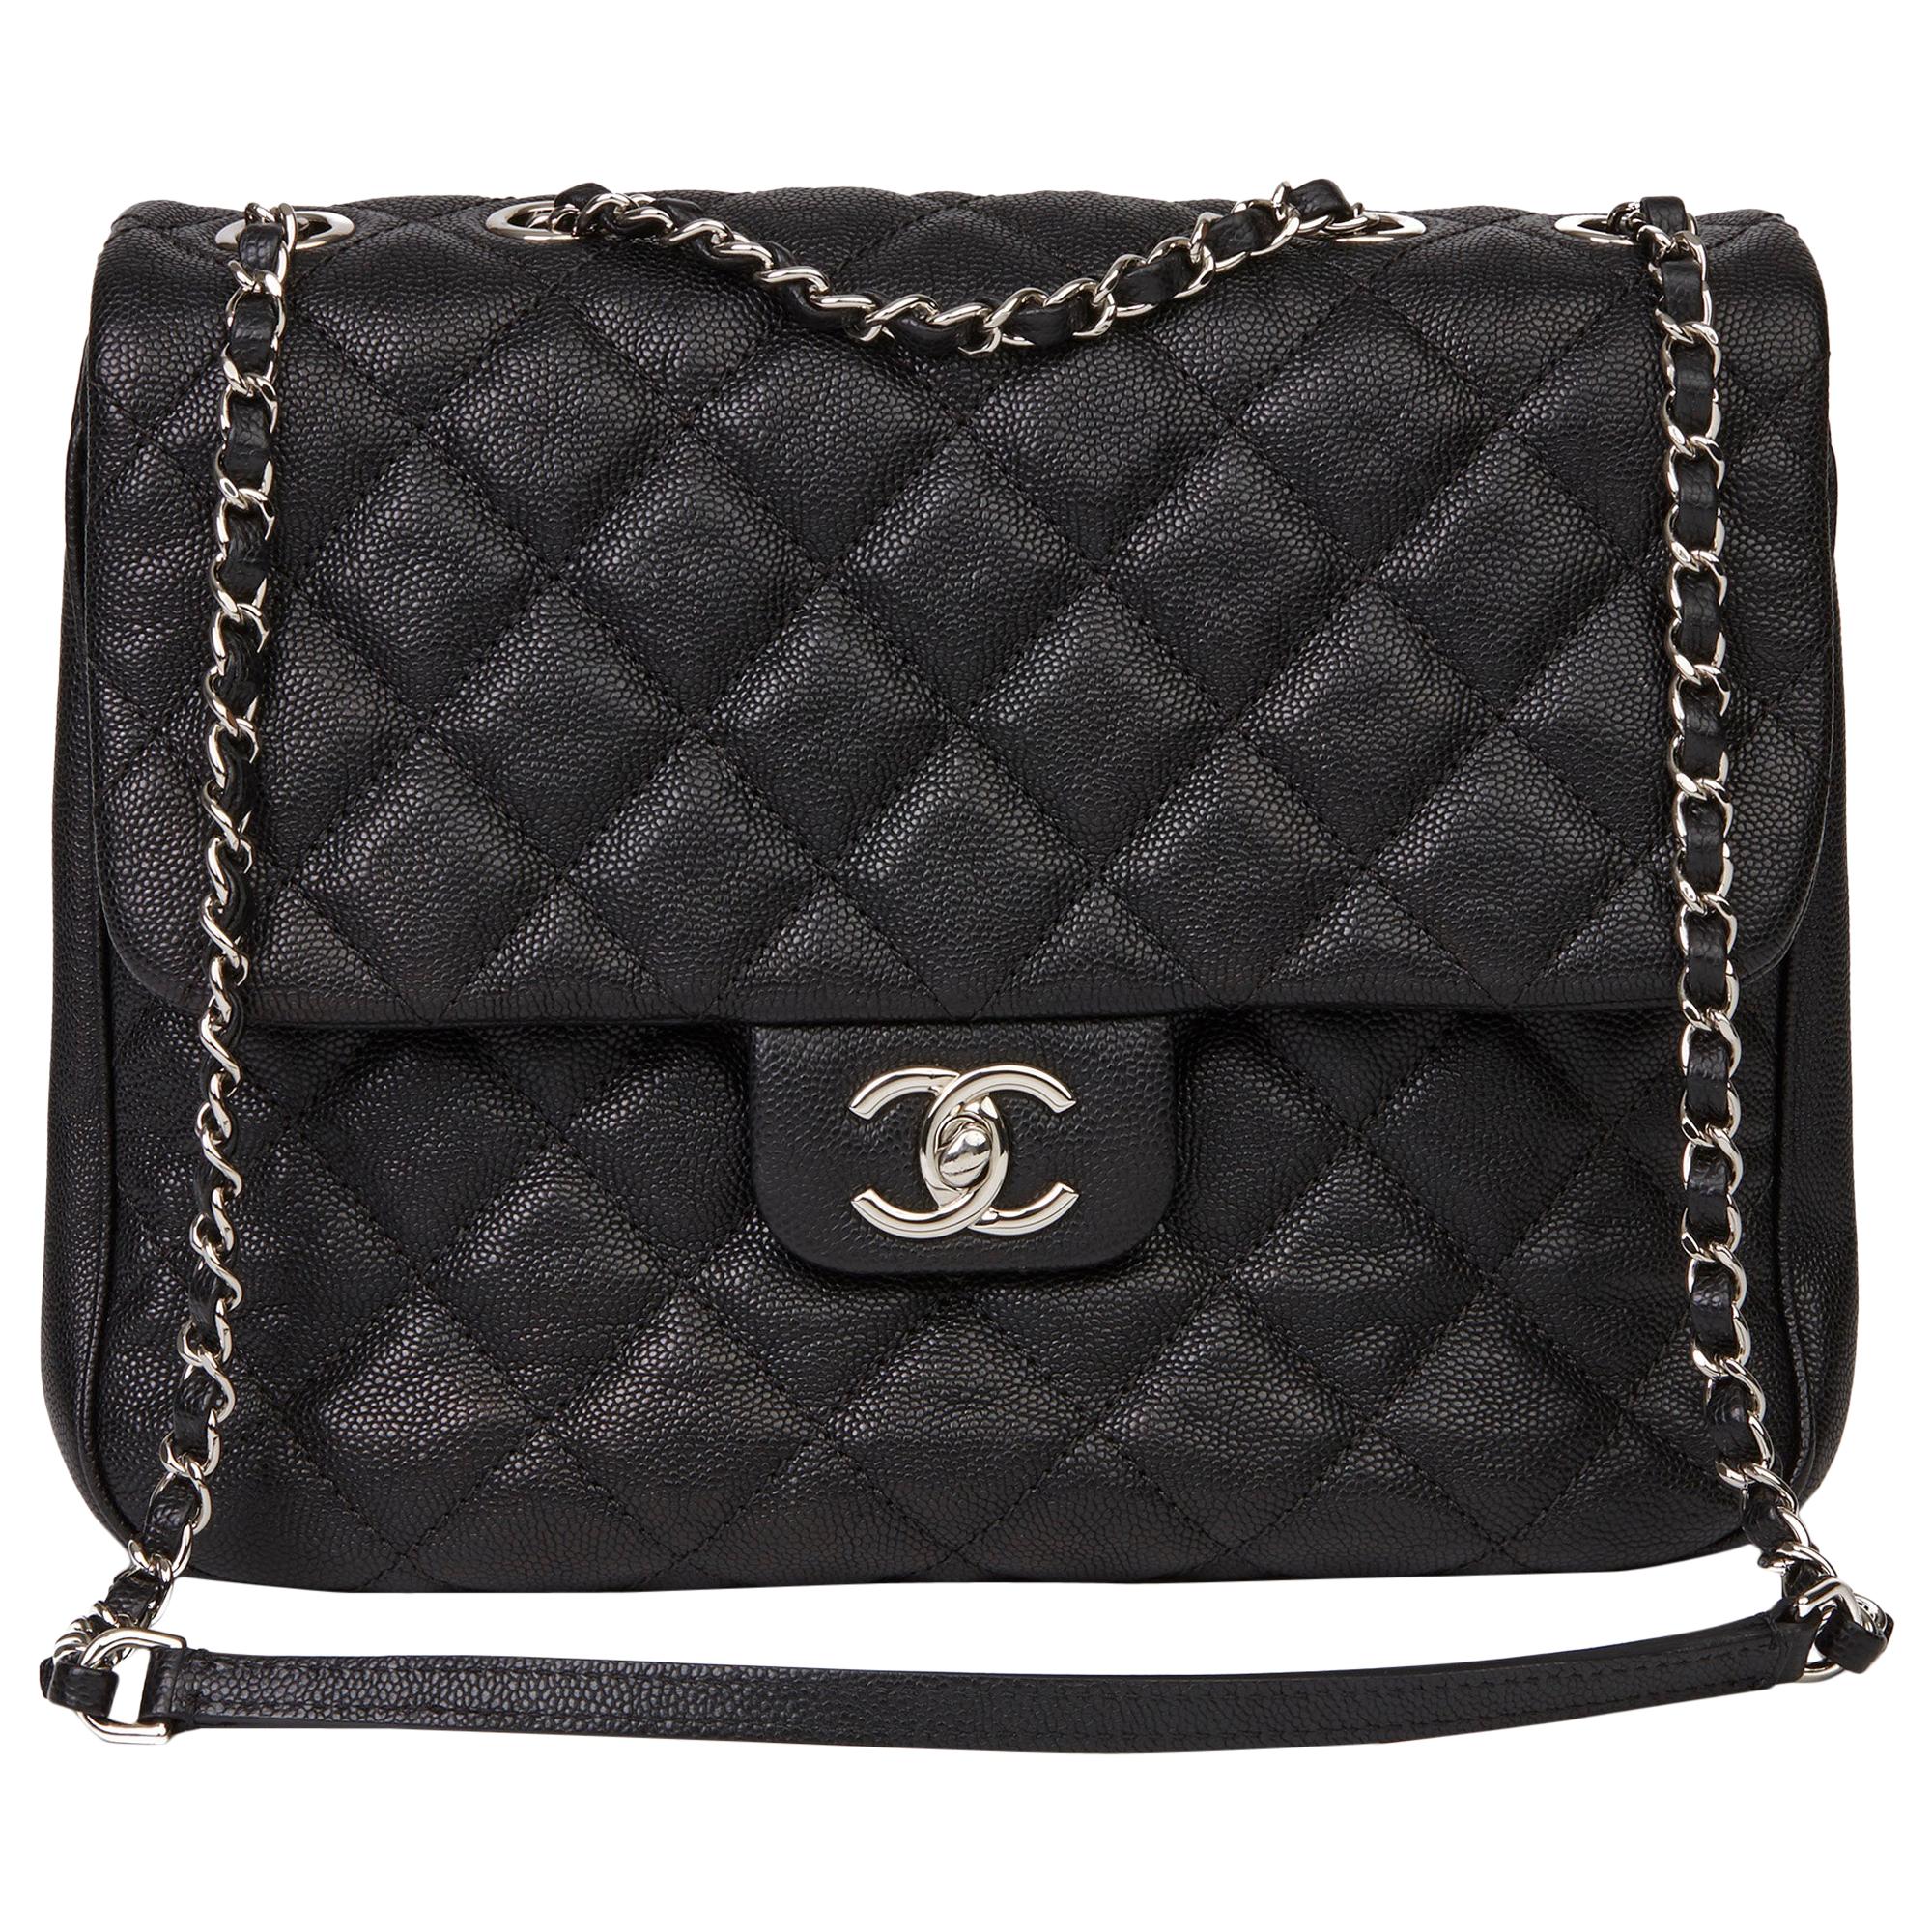 2019 Chanel Black Quilted Caviar Leather Urban Companion Flap Bag  